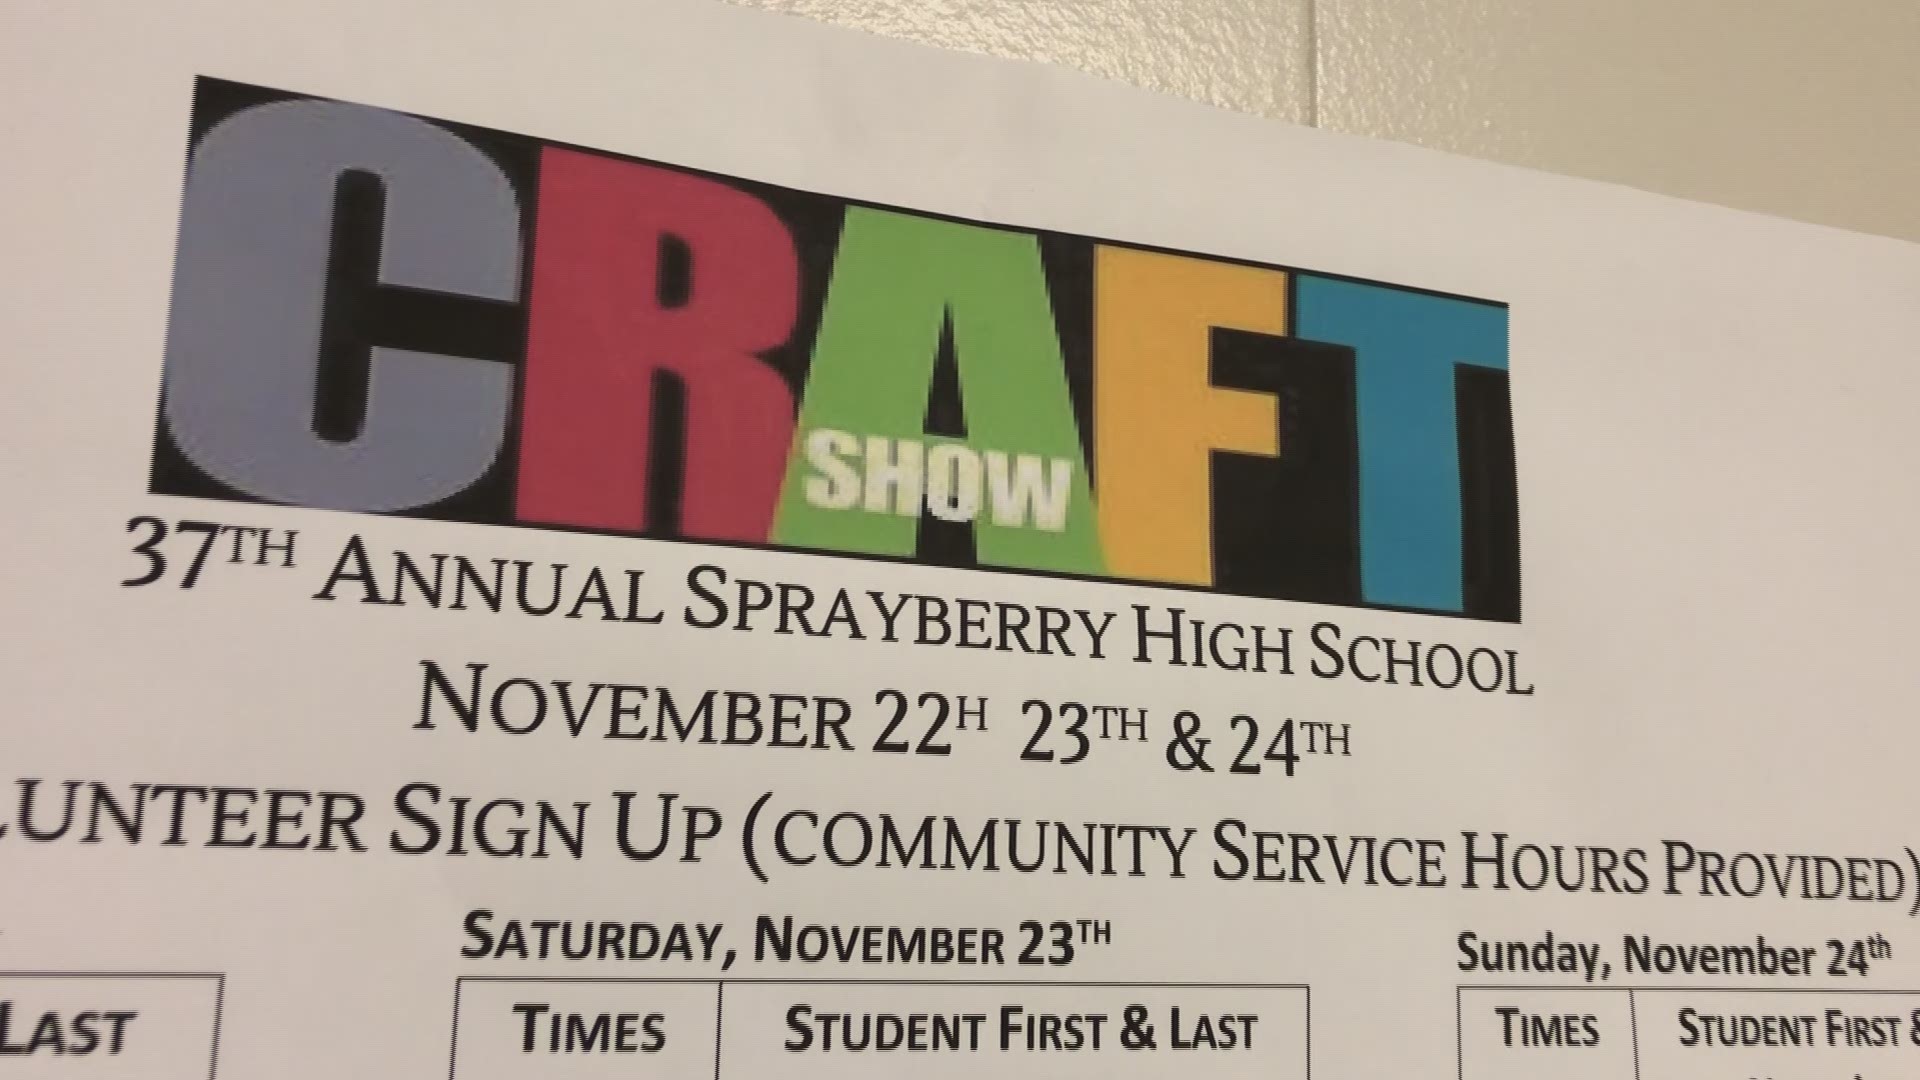 Sprayberry High School is preparing for its annual craft show which draws massive crowds every year.